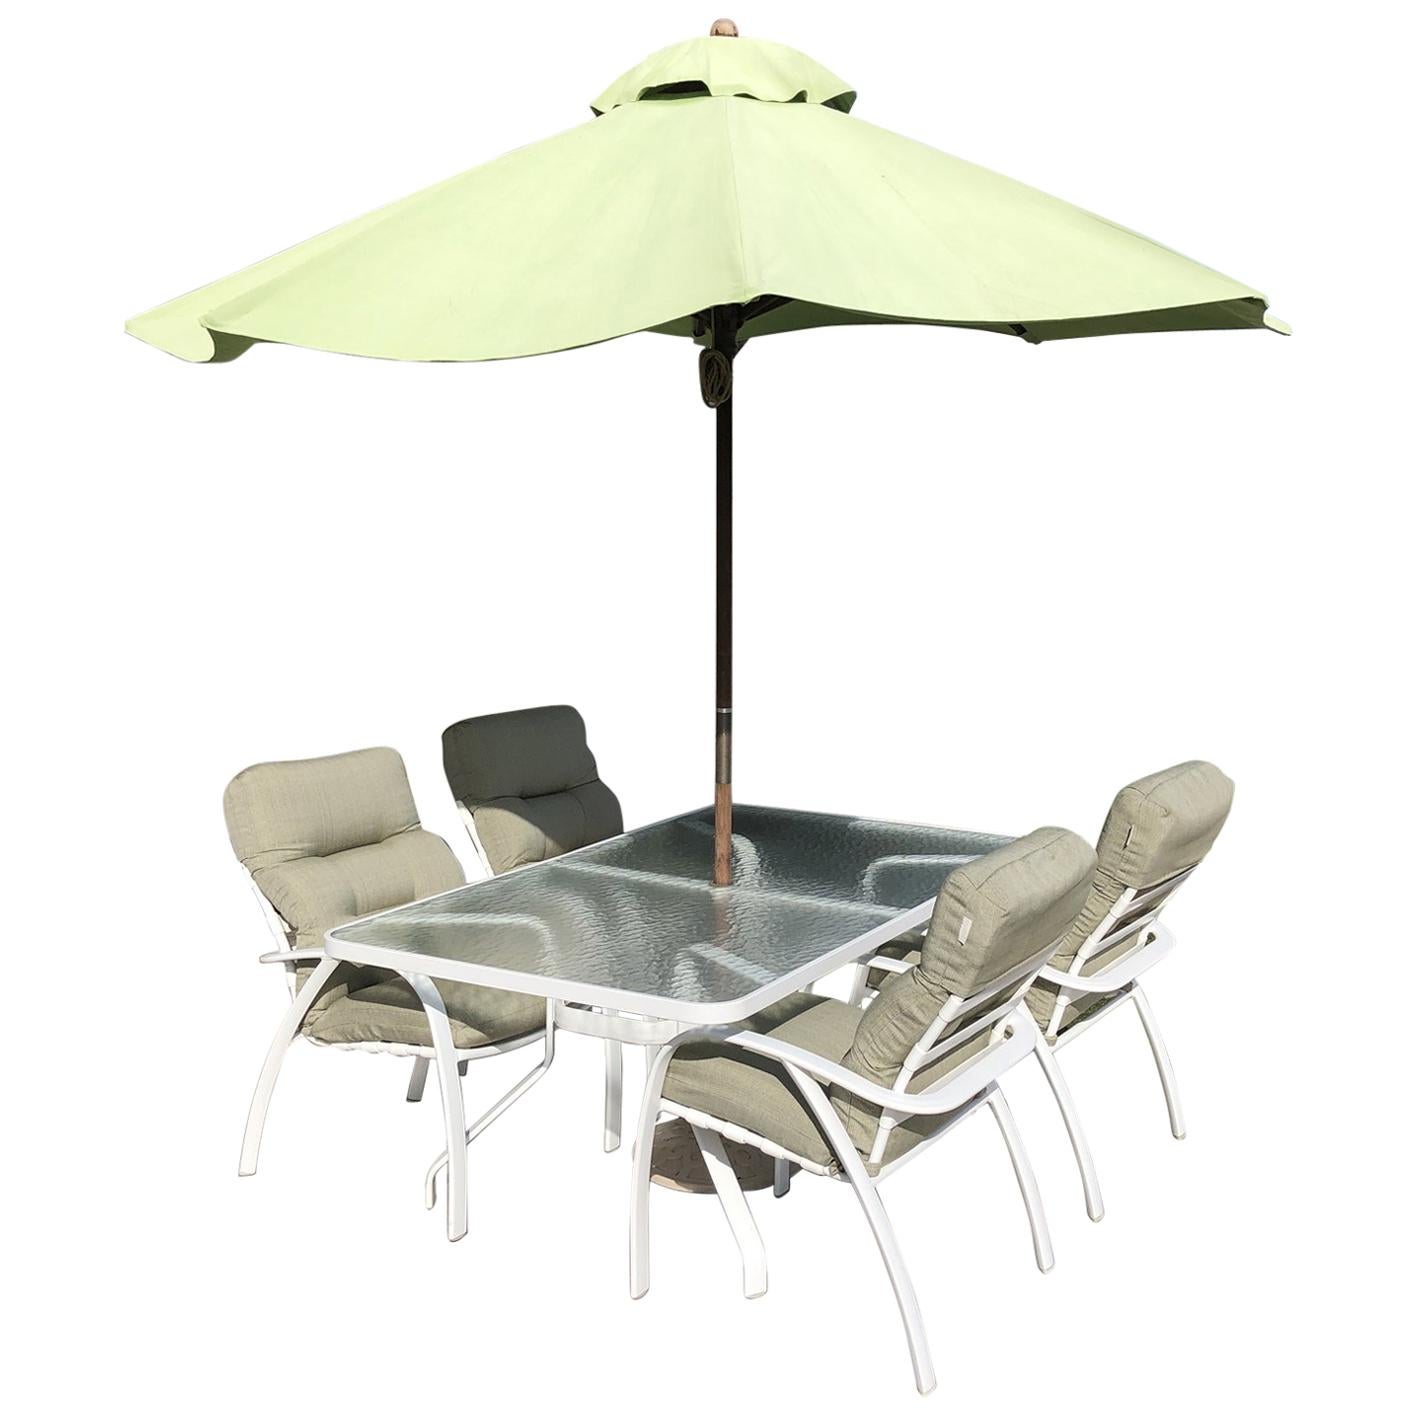 Tropitone Table, Four Chairs and Umbrella For Sale